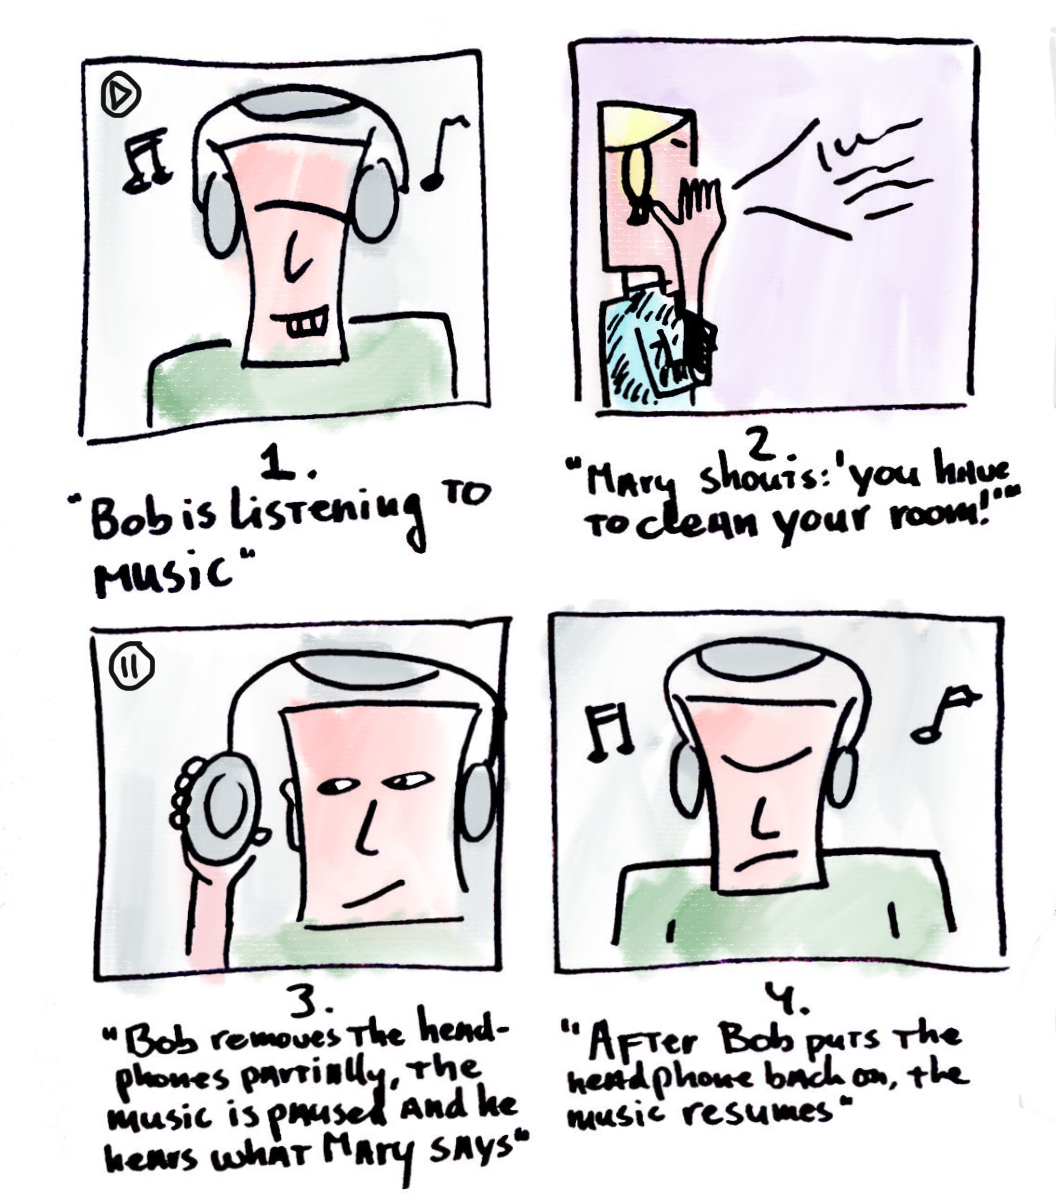 Use case for headphones